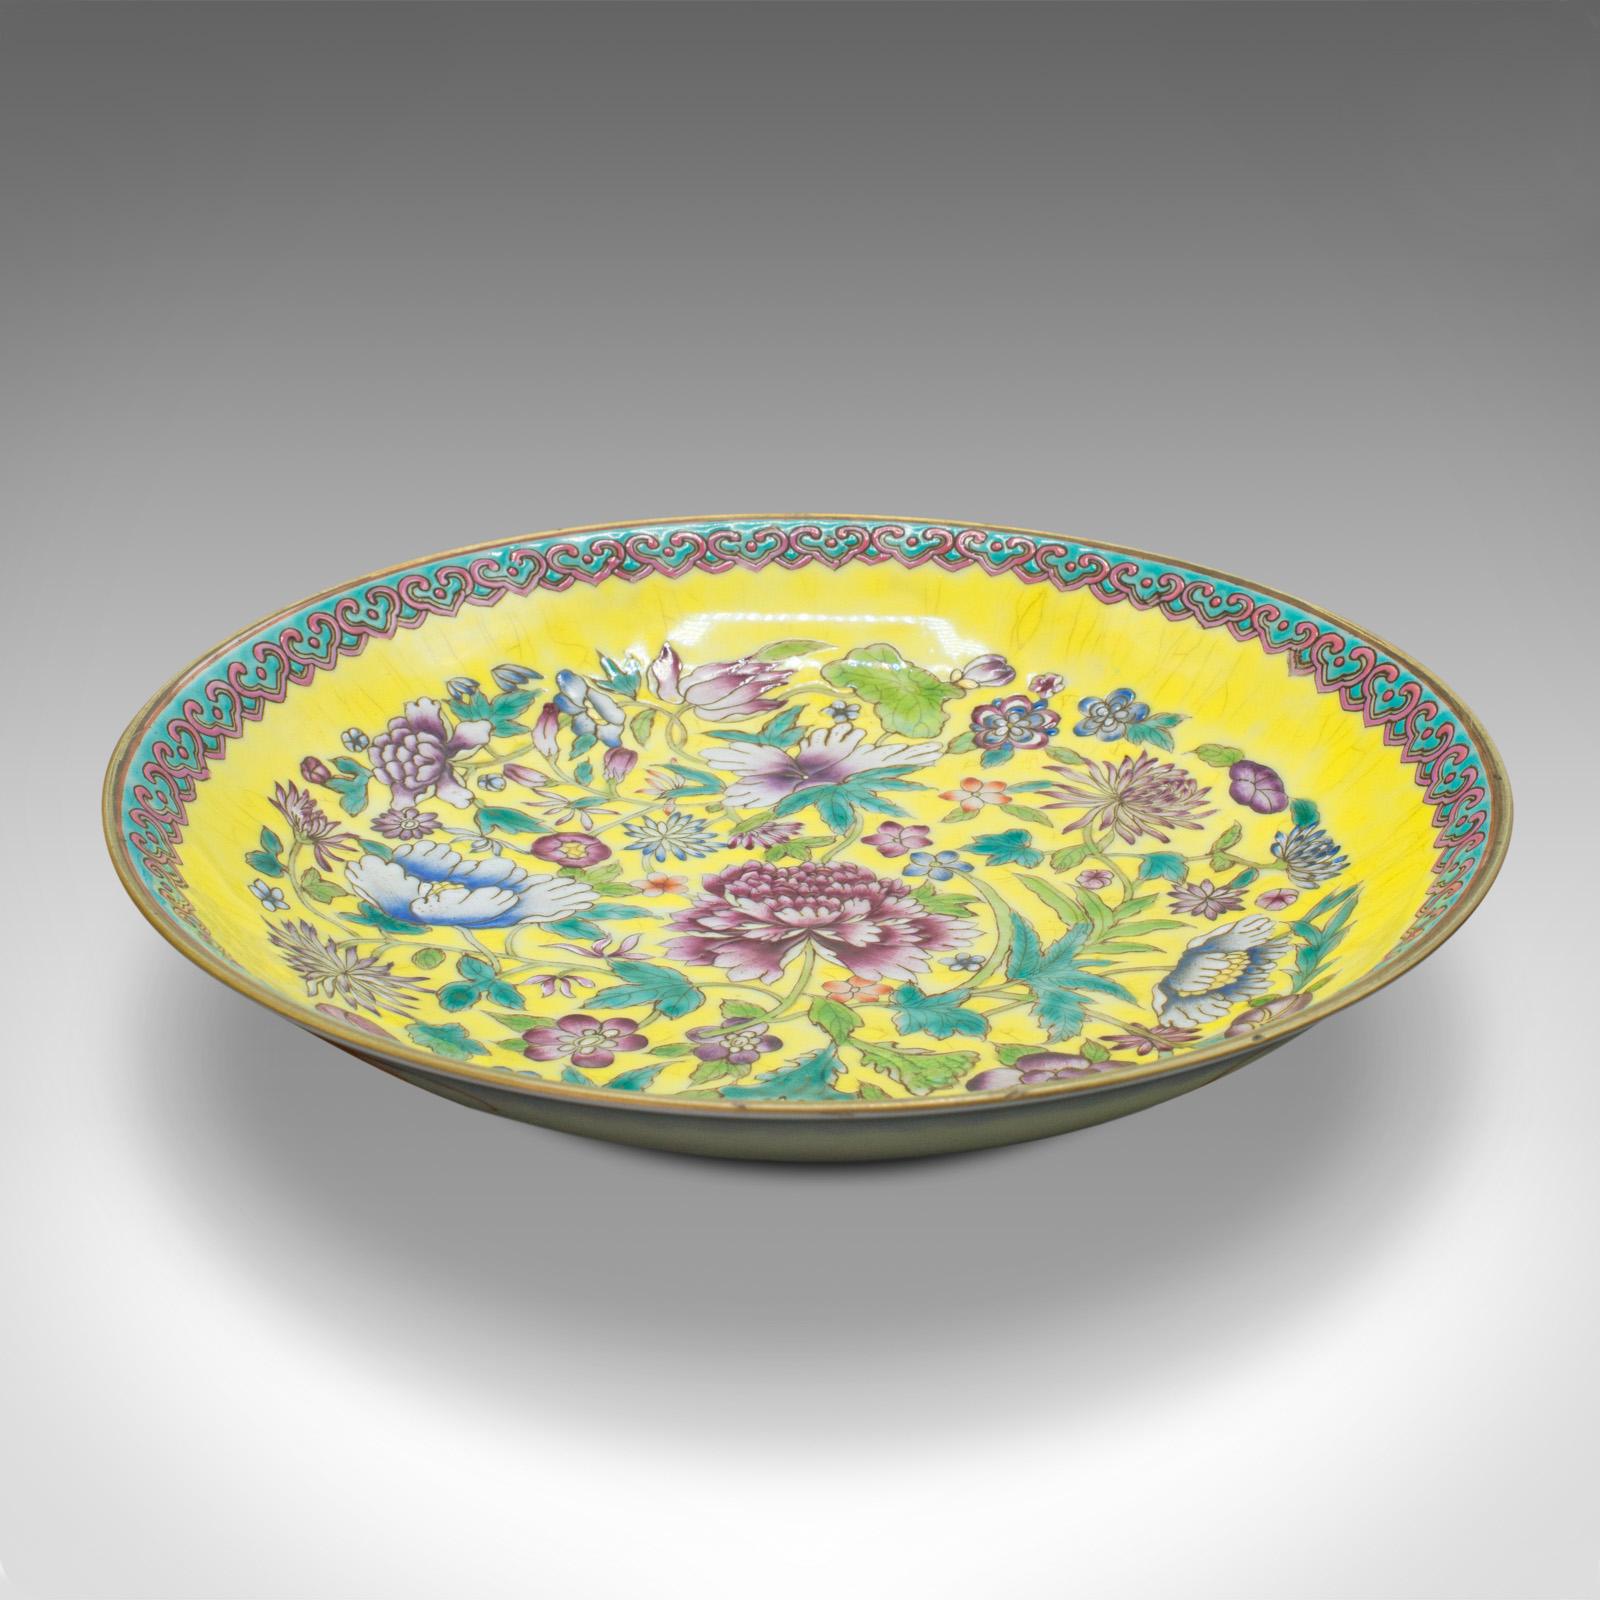 This is an antique Famille Jaune decorative dish. A Chinese, ceramic display plate, dating to the late Victorian period, circa 1900.

Delightfully vibrant palette to this attractive dish.
Displays a desirable aged patina and in superb